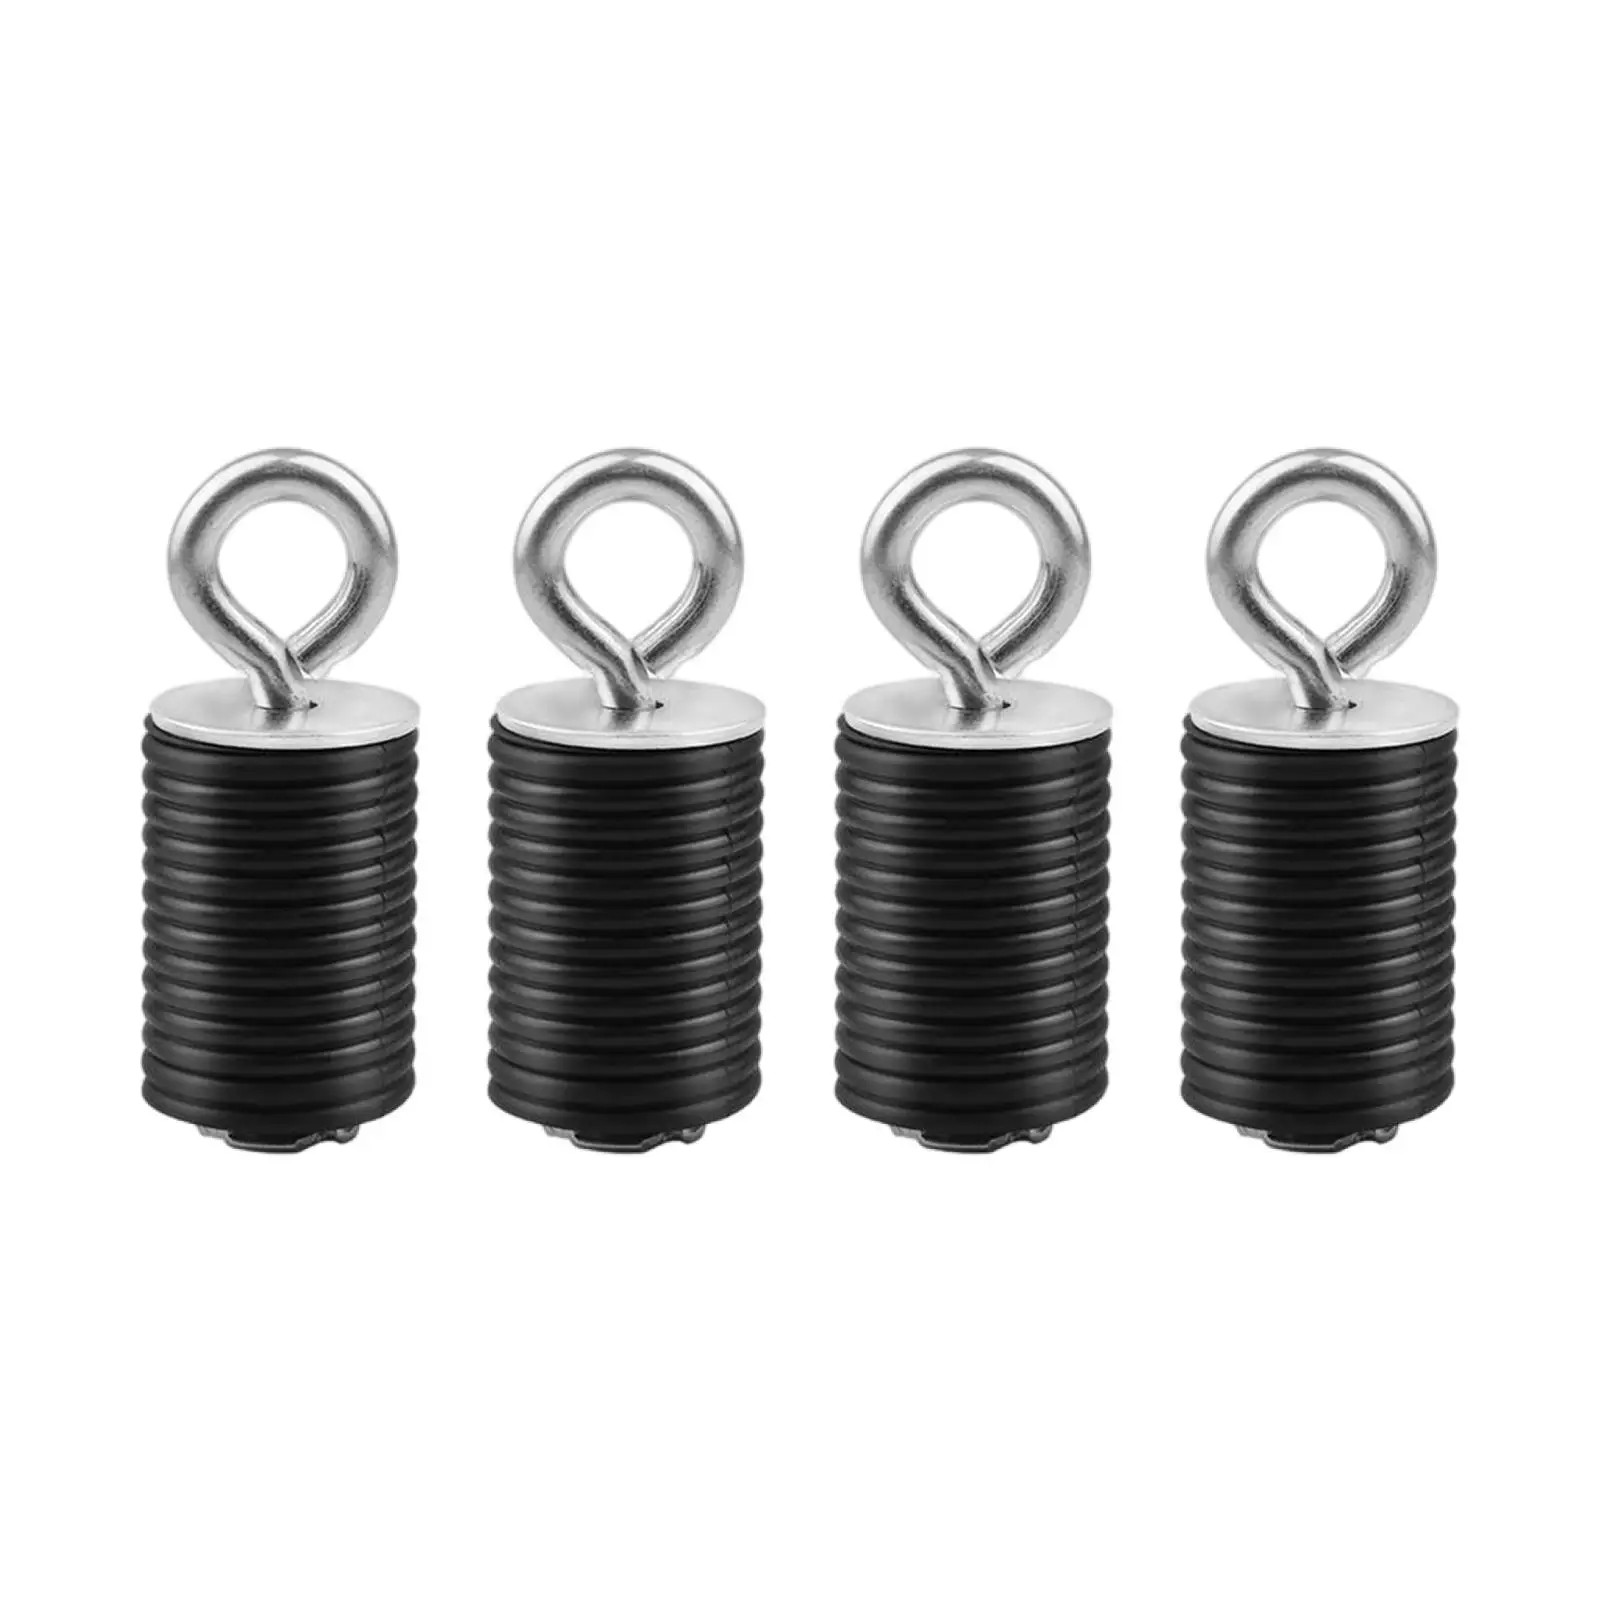 4 Pieces Tie Down Anchors Black Bed Anchors Fits for Polaris Ranger Parts Replace